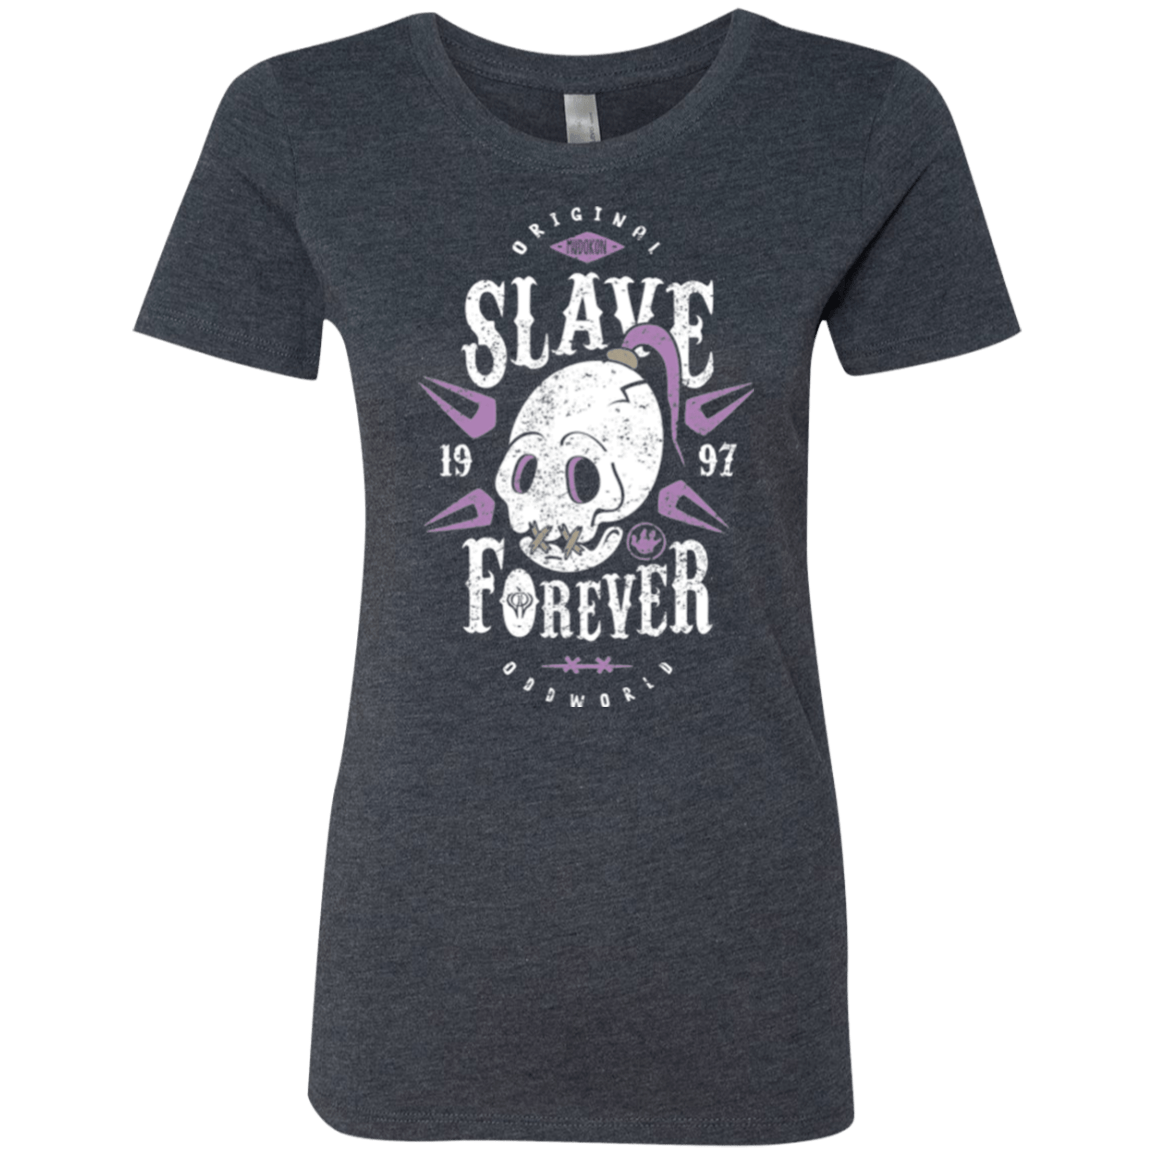 T-Shirts Vintage Navy / Small Slave Forever Women's Triblend T-Shirt